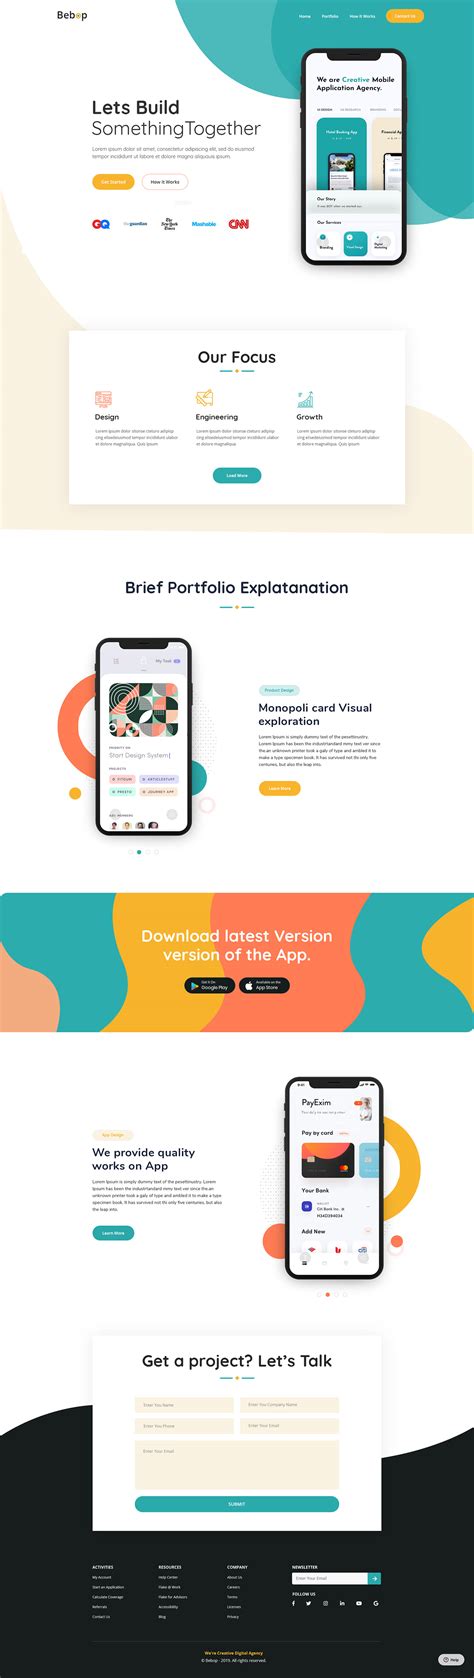 Landernow allows you to make changes in any element of your landing page to make it suitable for your needs. Mobile App Landing Page on Behance